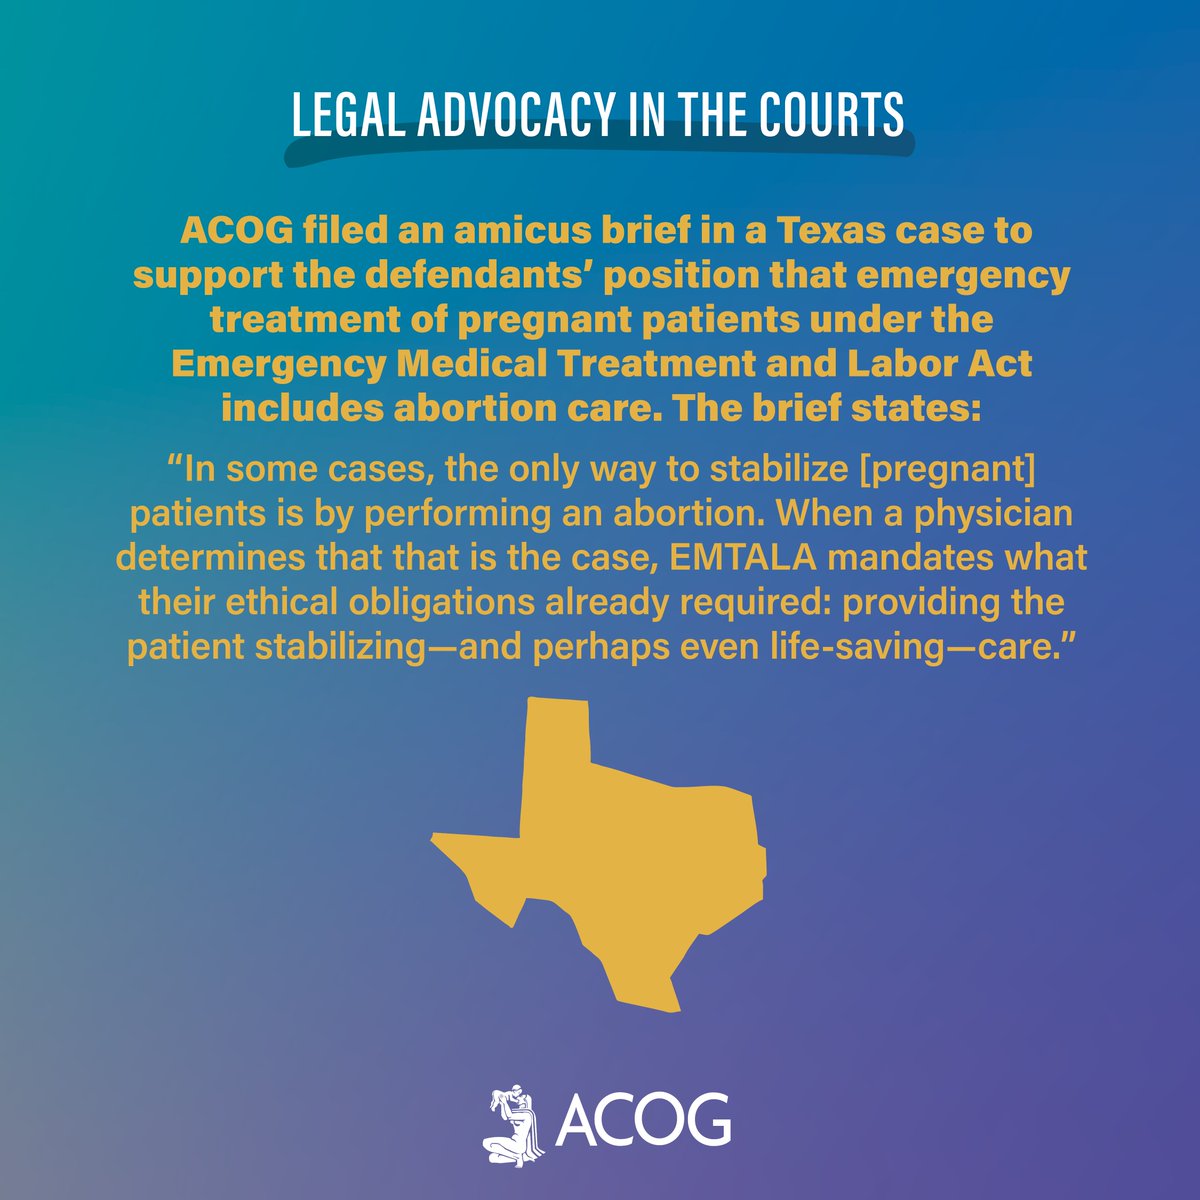 “Abortion may be the necessary stabilizing treatment for some emergency conditions.” Read more of the amicus brief that ACOG, @AmerMedicalAssn, @MySMFM, and more filed in a Texas case about abortion care as emergency medical treatment for pregnant patients:bit.ly/3Aw9Jqp